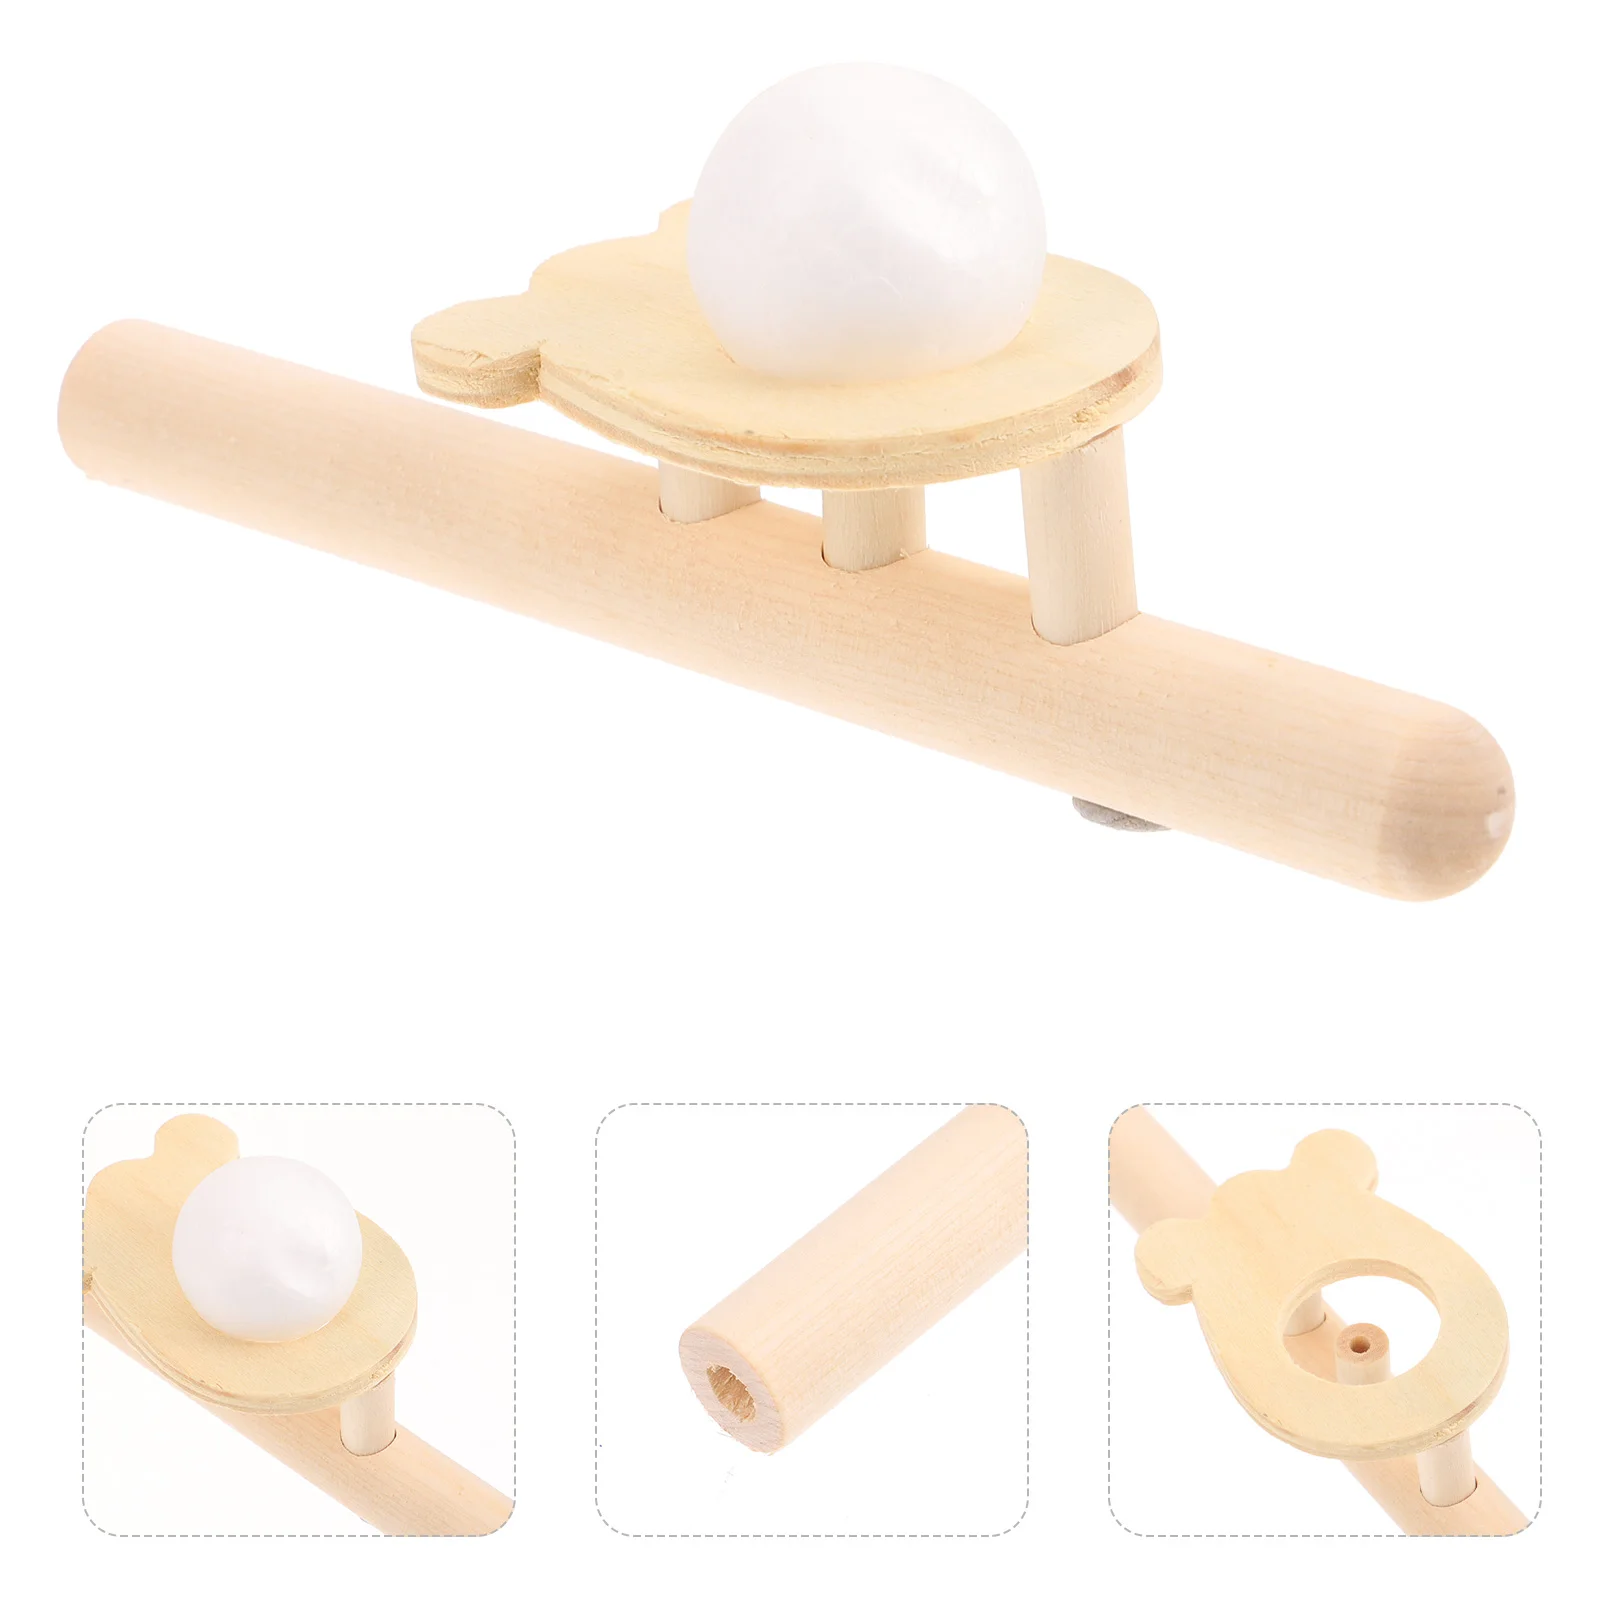 5 Pcs Suspension Ball Blowing Machine Toy Toys The Pipe Kids Bamboo Party Funny for Children cg1 30 cg1 100 cg2 11 cg2 11g cg2 magnetic pipe flame cutting machine gas cutter rubber hose m12x1 25mm